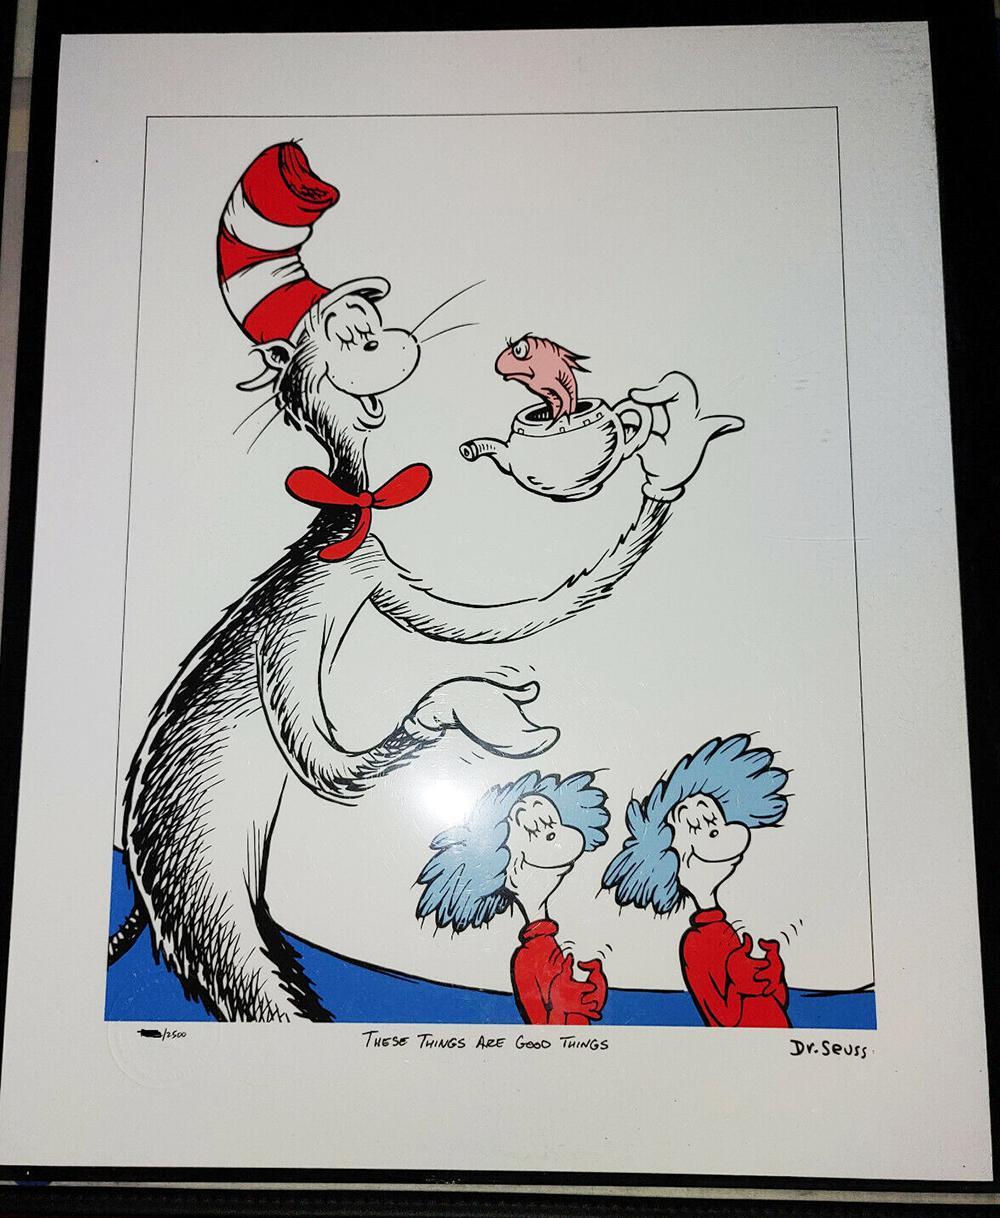 These Things Are Good Things - Print by (after) Dr. Seuss (Theodore Geisel)